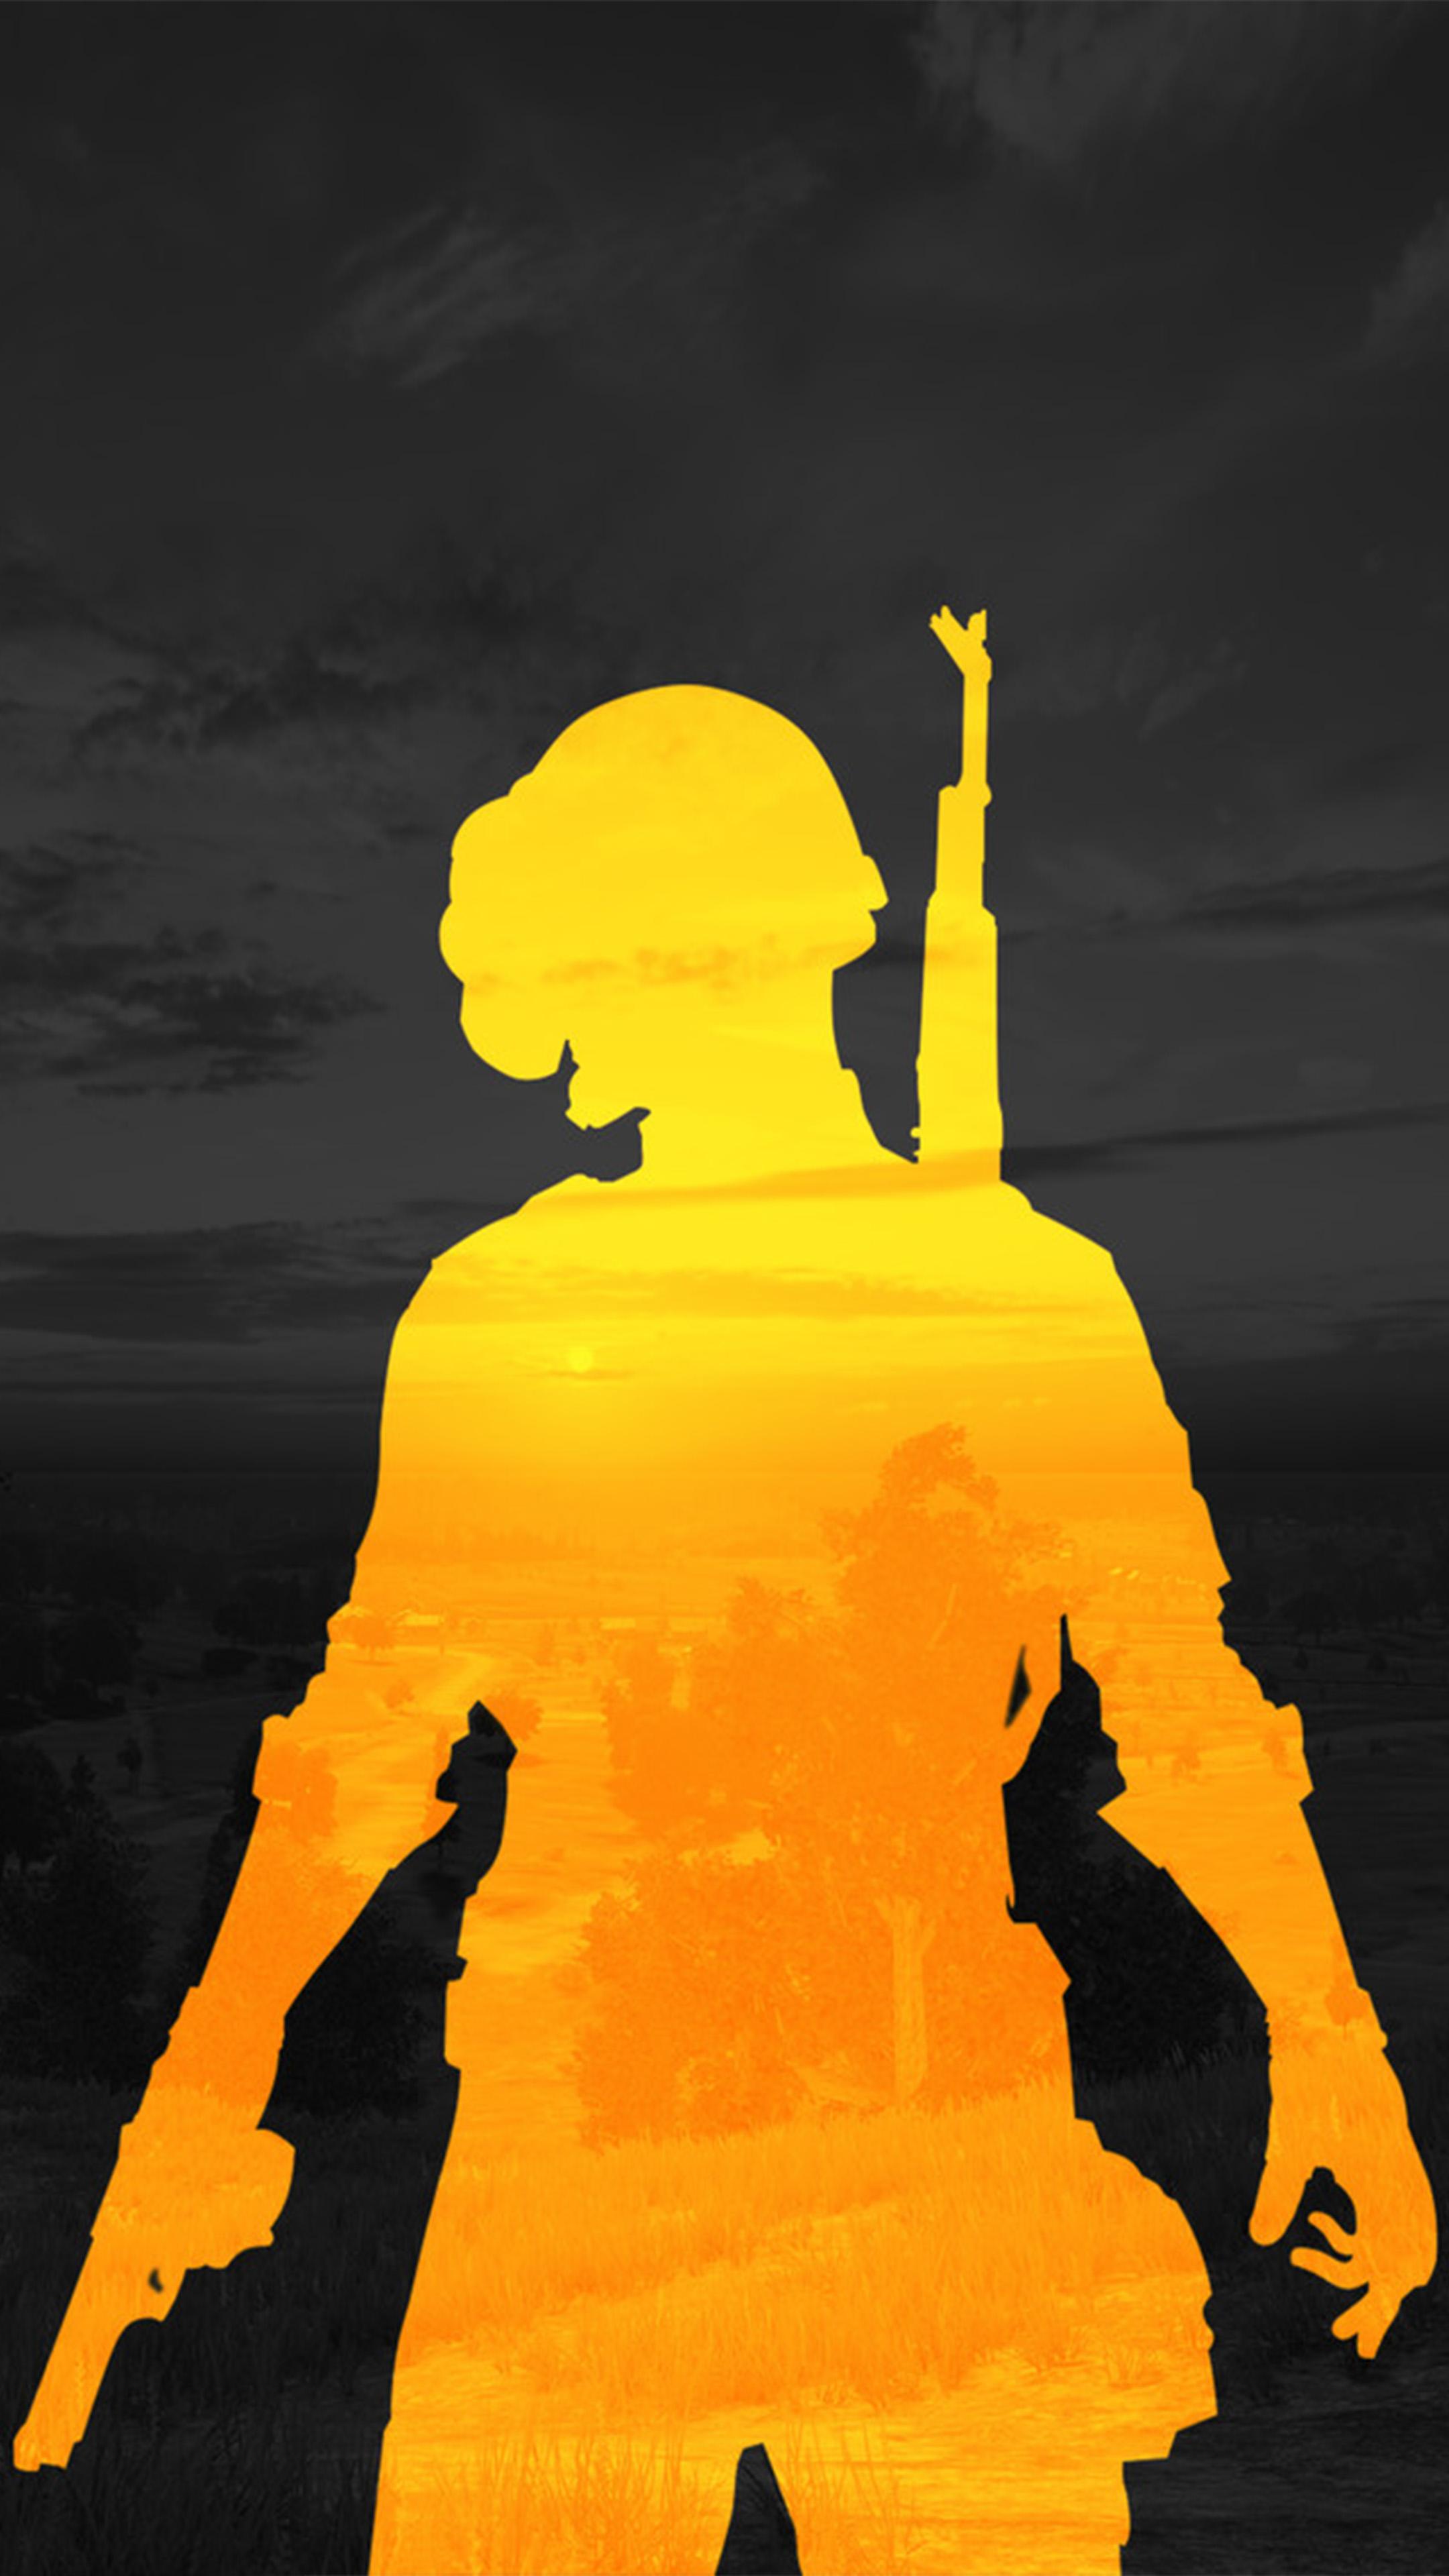 Pubg 4k Ultra Hd Wallpapers For Mobile